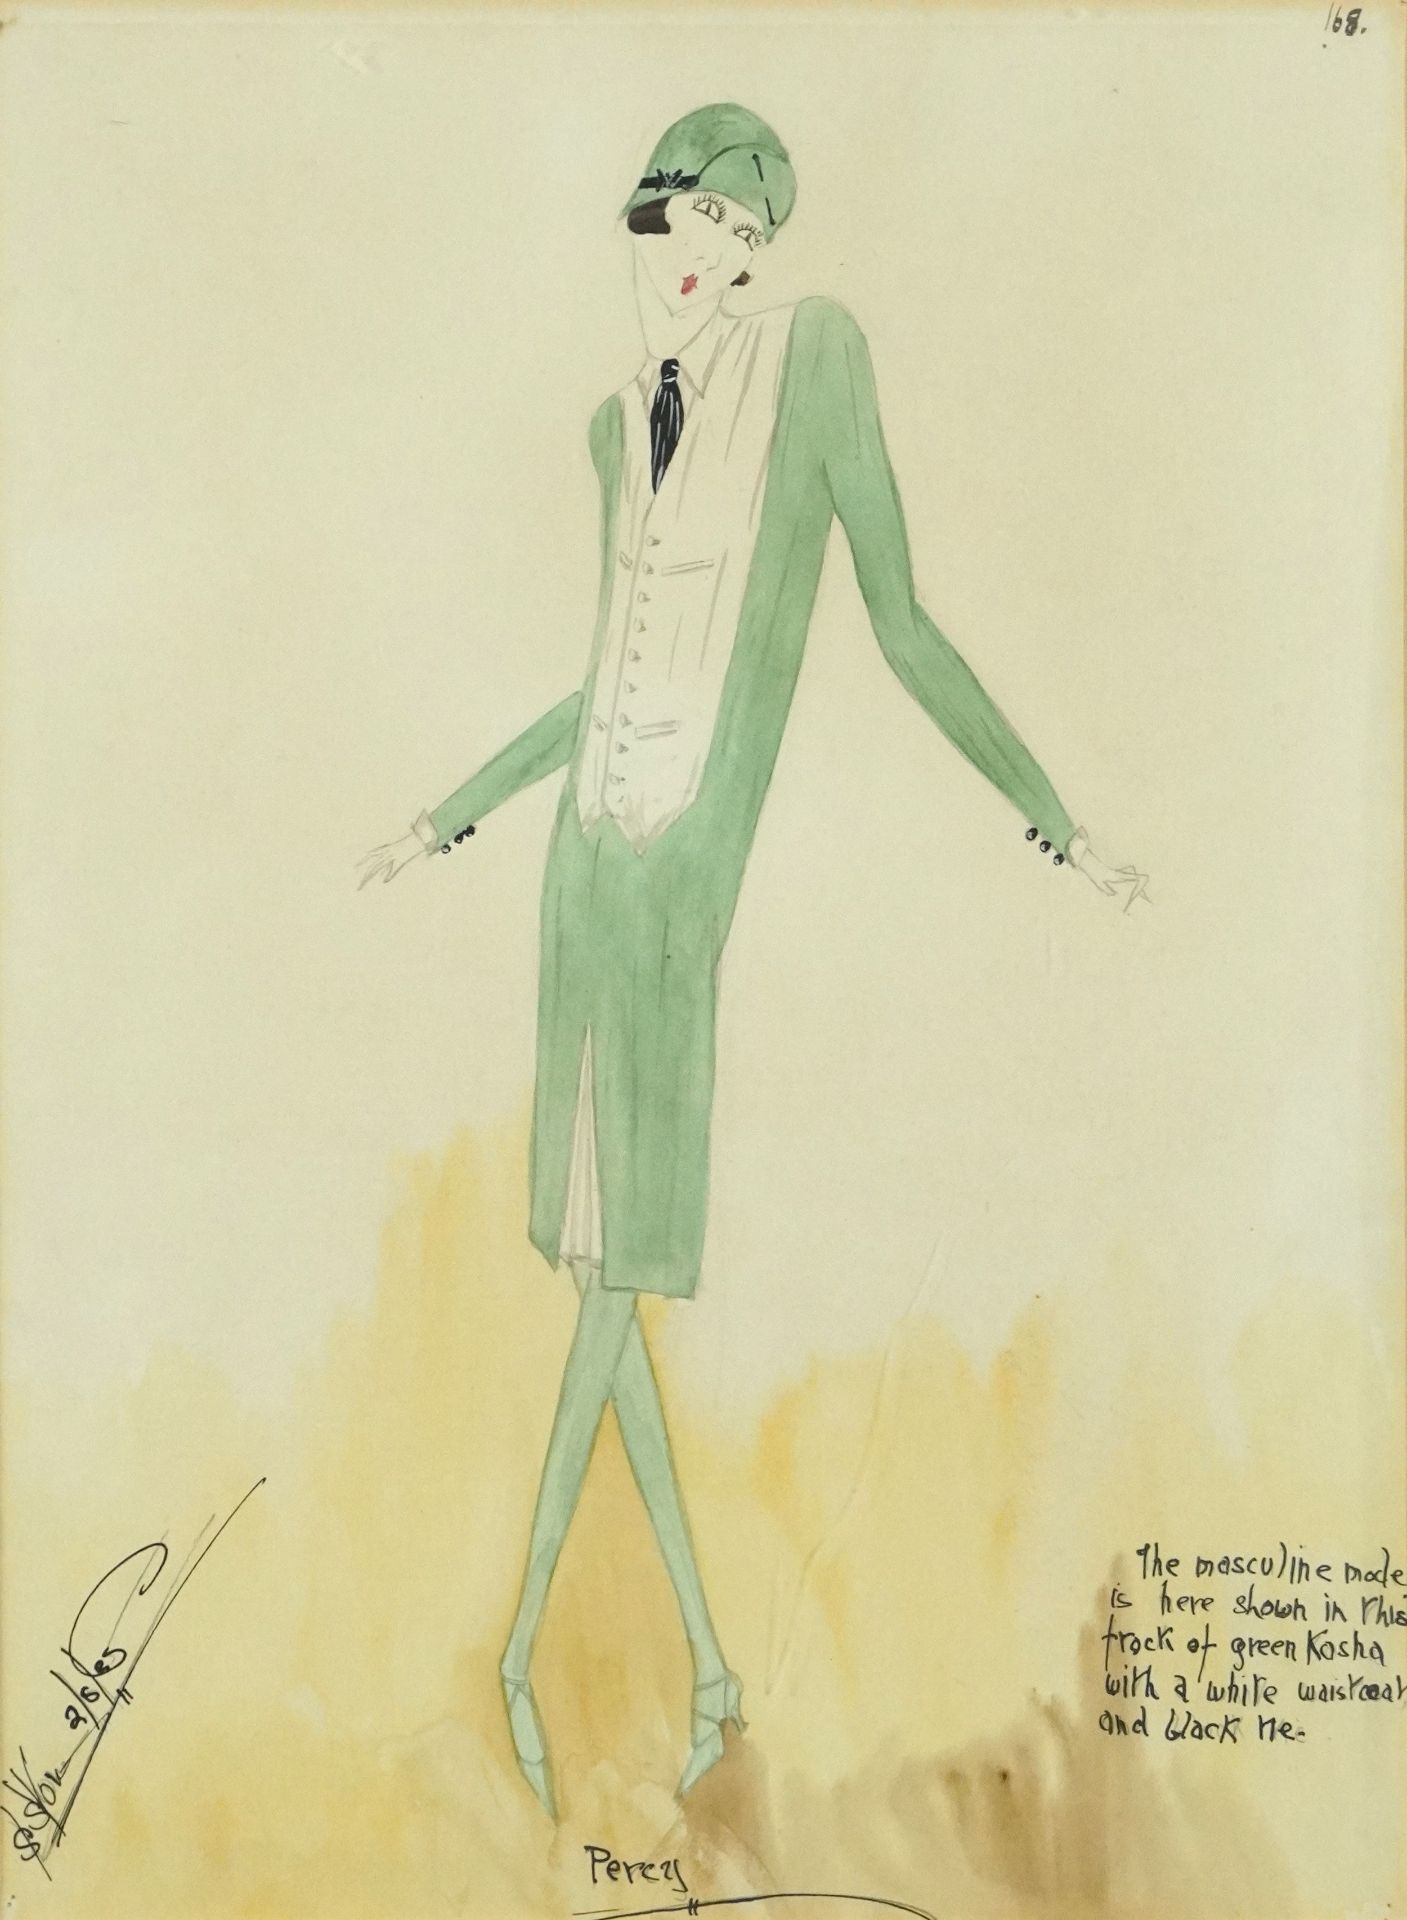 Female wearing a green Kosha frock with white waistcoat and black tie, Art Deco pencil and